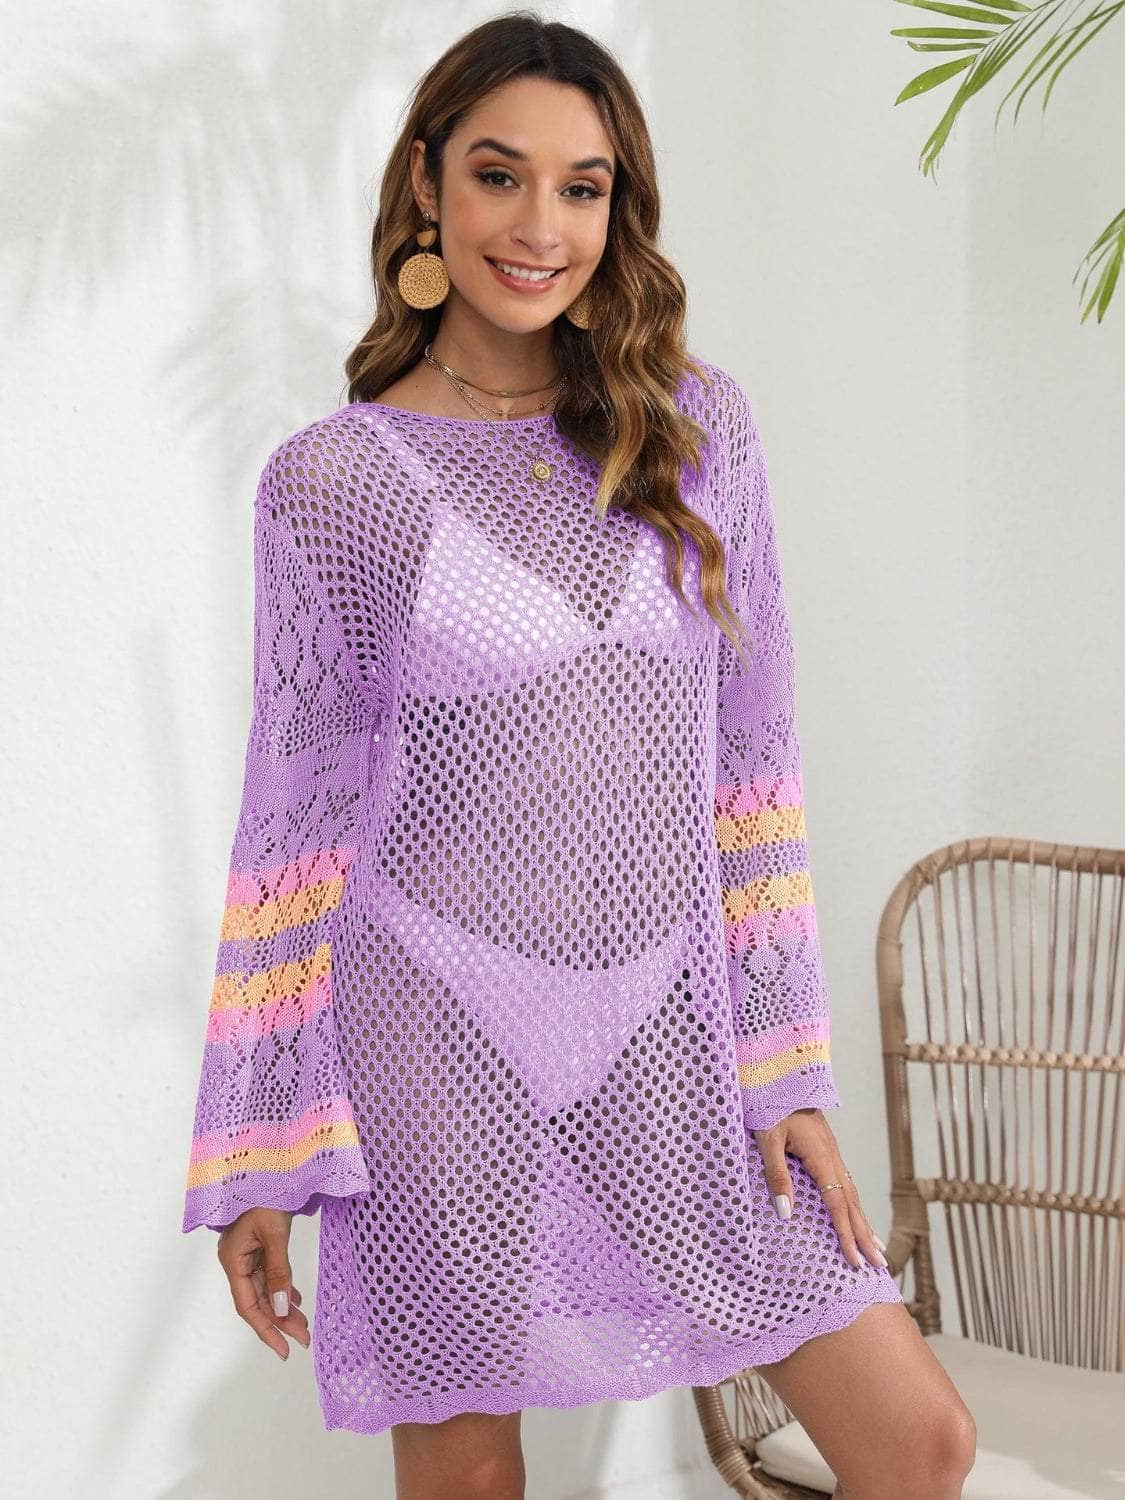 Openwork Contrast Long Sleeve Cover-Up Heliotrope Purple / One Size